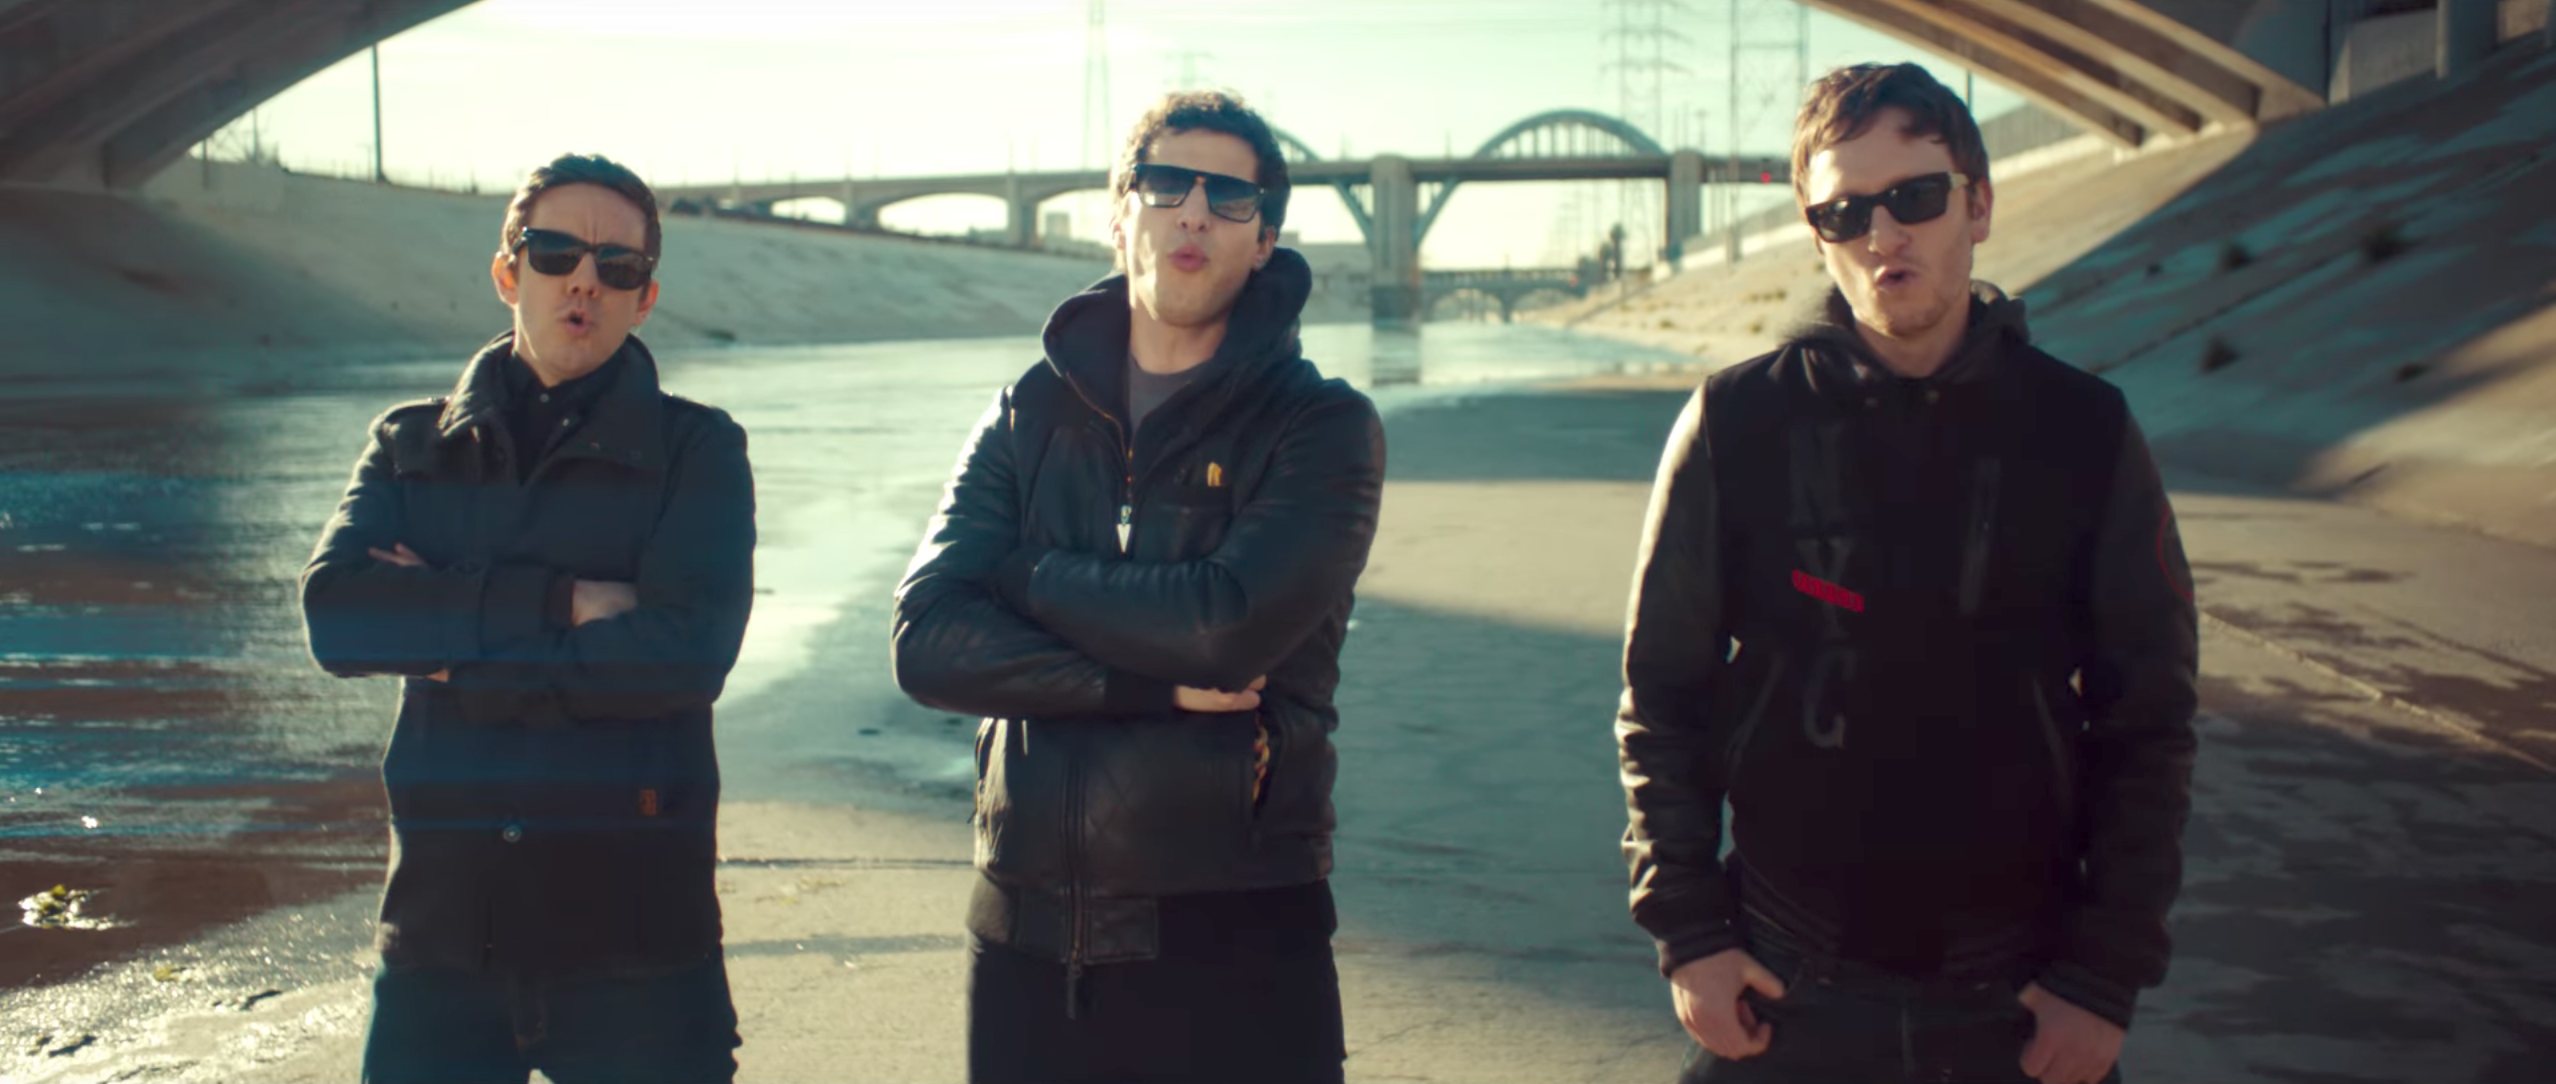 You Oughta Look Out: The Definitive Ranking of The Lonely Island Pt. 3